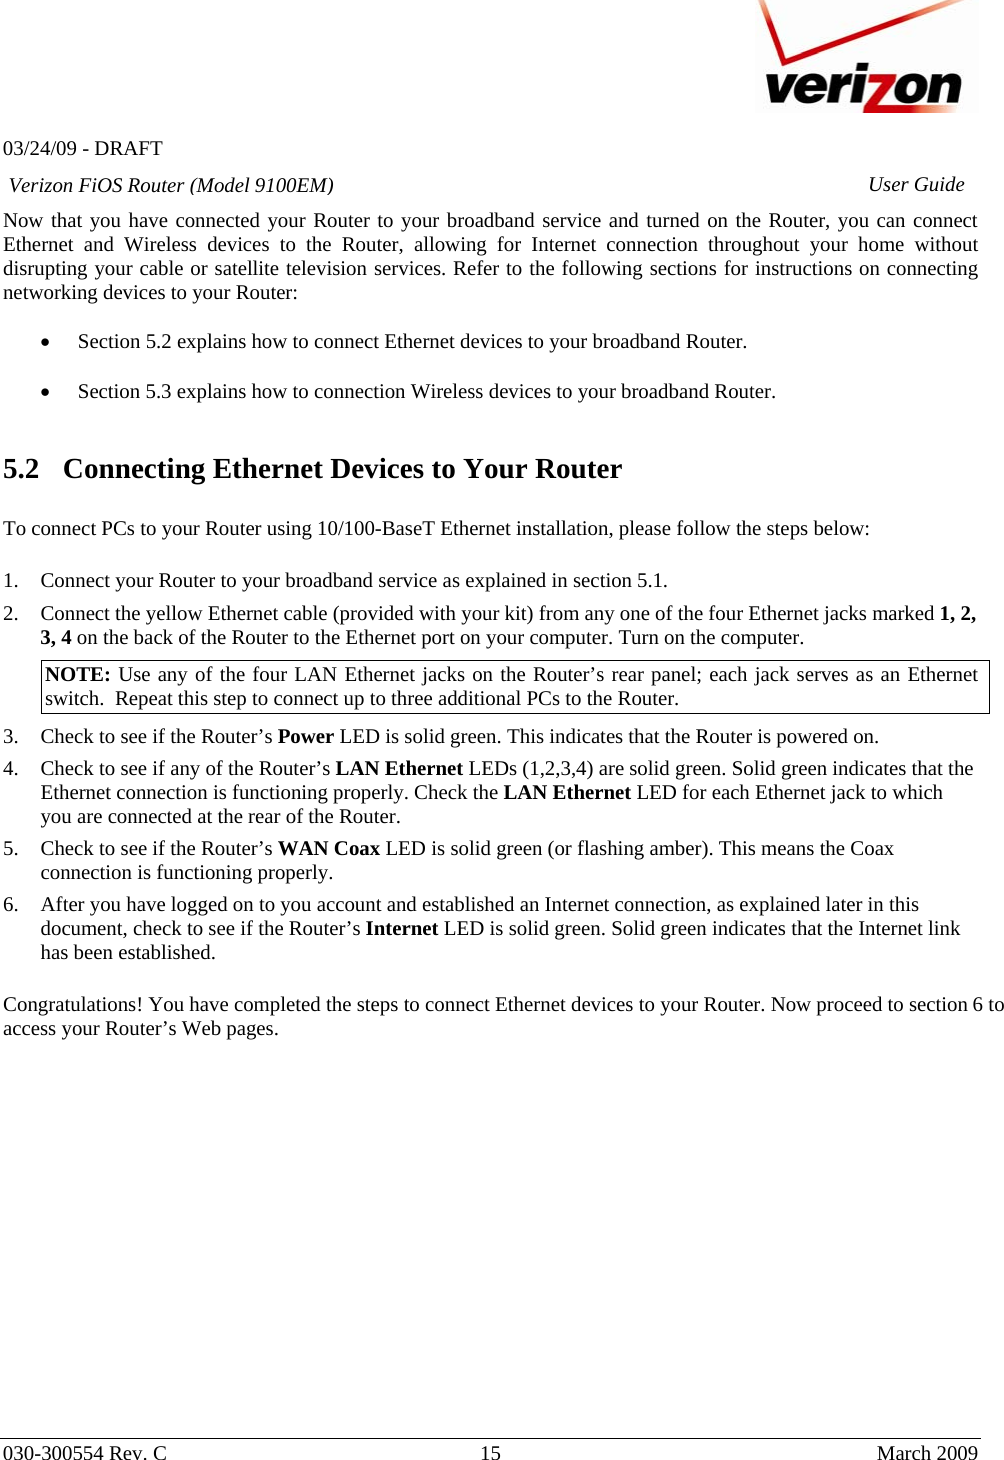   03/24/09 - DRAFT   030-300554 Rev. C  15      March 2009  Verizon FiOS Router (Model 9100EM) User GuideNow that you have connected your Router to your broadband service and turned on the Router, you can connect Ethernet and Wireless devices to the Router, allowing for Internet connection throughout your home without disrupting your cable or satellite television services. Refer to the following sections for instructions on connecting networking devices to your Router:  • Section 5.2 explains how to connect Ethernet devices to your broadband Router.  • Section 5.3 explains how to connection Wireless devices to your broadband Router.   5.2 Connecting Ethernet Devices to Your Router  To connect PCs to your Router using 10/100-BaseT Ethernet installation, please follow the steps below:  1. Connect your Router to your broadband service as explained in section 5.1.  2. Connect the yellow Ethernet cable (provided with your kit) from any one of the four Ethernet jacks marked 1, 2, 3, 4 on the back of the Router to the Ethernet port on your computer. Turn on the computer. NOTE: Use any of the four LAN Ethernet jacks on the Router’s rear panel; each jack serves as an Ethernet switch.  Repeat this step to connect up to three additional PCs to the Router. 3. Check to see if the Router’s Power LED is solid green. This indicates that the Router is powered on. 4. Check to see if any of the Router’s LAN Ethernet LEDs (1,2,3,4) are solid green. Solid green indicates that the Ethernet connection is functioning properly. Check the LAN Ethernet LED for each Ethernet jack to which you are connected at the rear of the Router. 5. Check to see if the Router’s WAN Coax LED is solid green (or flashing amber). This means the Coax connection is functioning properly. 6. After you have logged on to you account and established an Internet connection, as explained later in this document, check to see if the Router’s Internet LED is solid green. Solid green indicates that the Internet link has been established.   Congratulations! You have completed the steps to connect Ethernet devices to your Router. Now proceed to section 6 to access your Router’s Web pages.                  